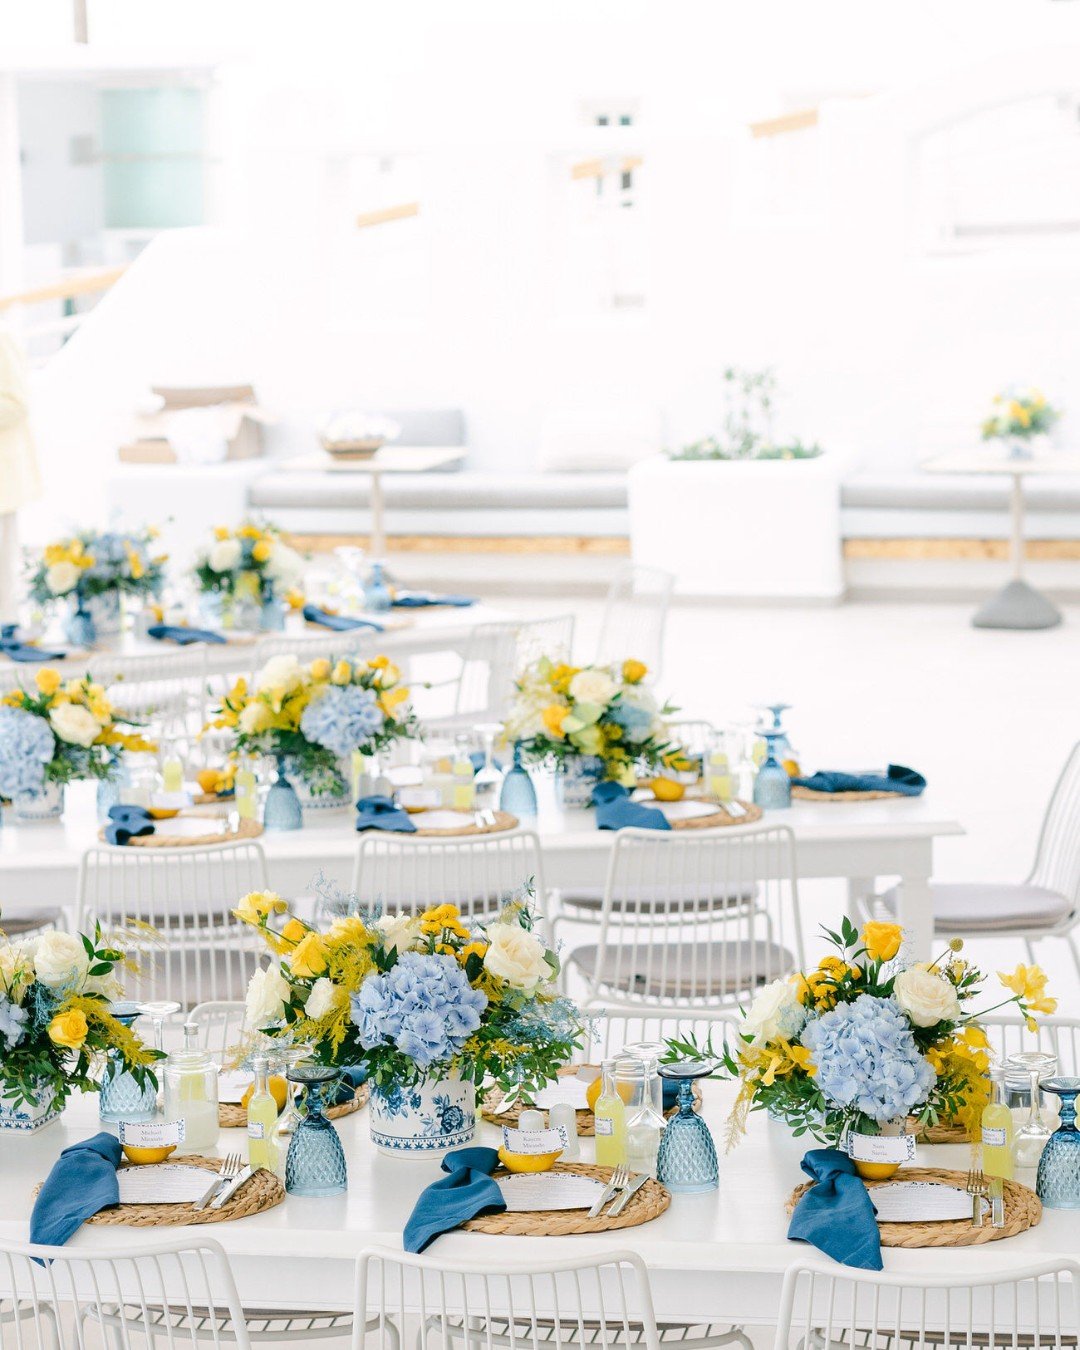 If you're seeking an energetic, coastal-inspired whimsical d&eacute;cor for your wedding day, this is the style to embrace. 🩵💛

Trust us to craft the perfect ambiance for your special day and we'll guide you towards a personalized aesthetic that ca